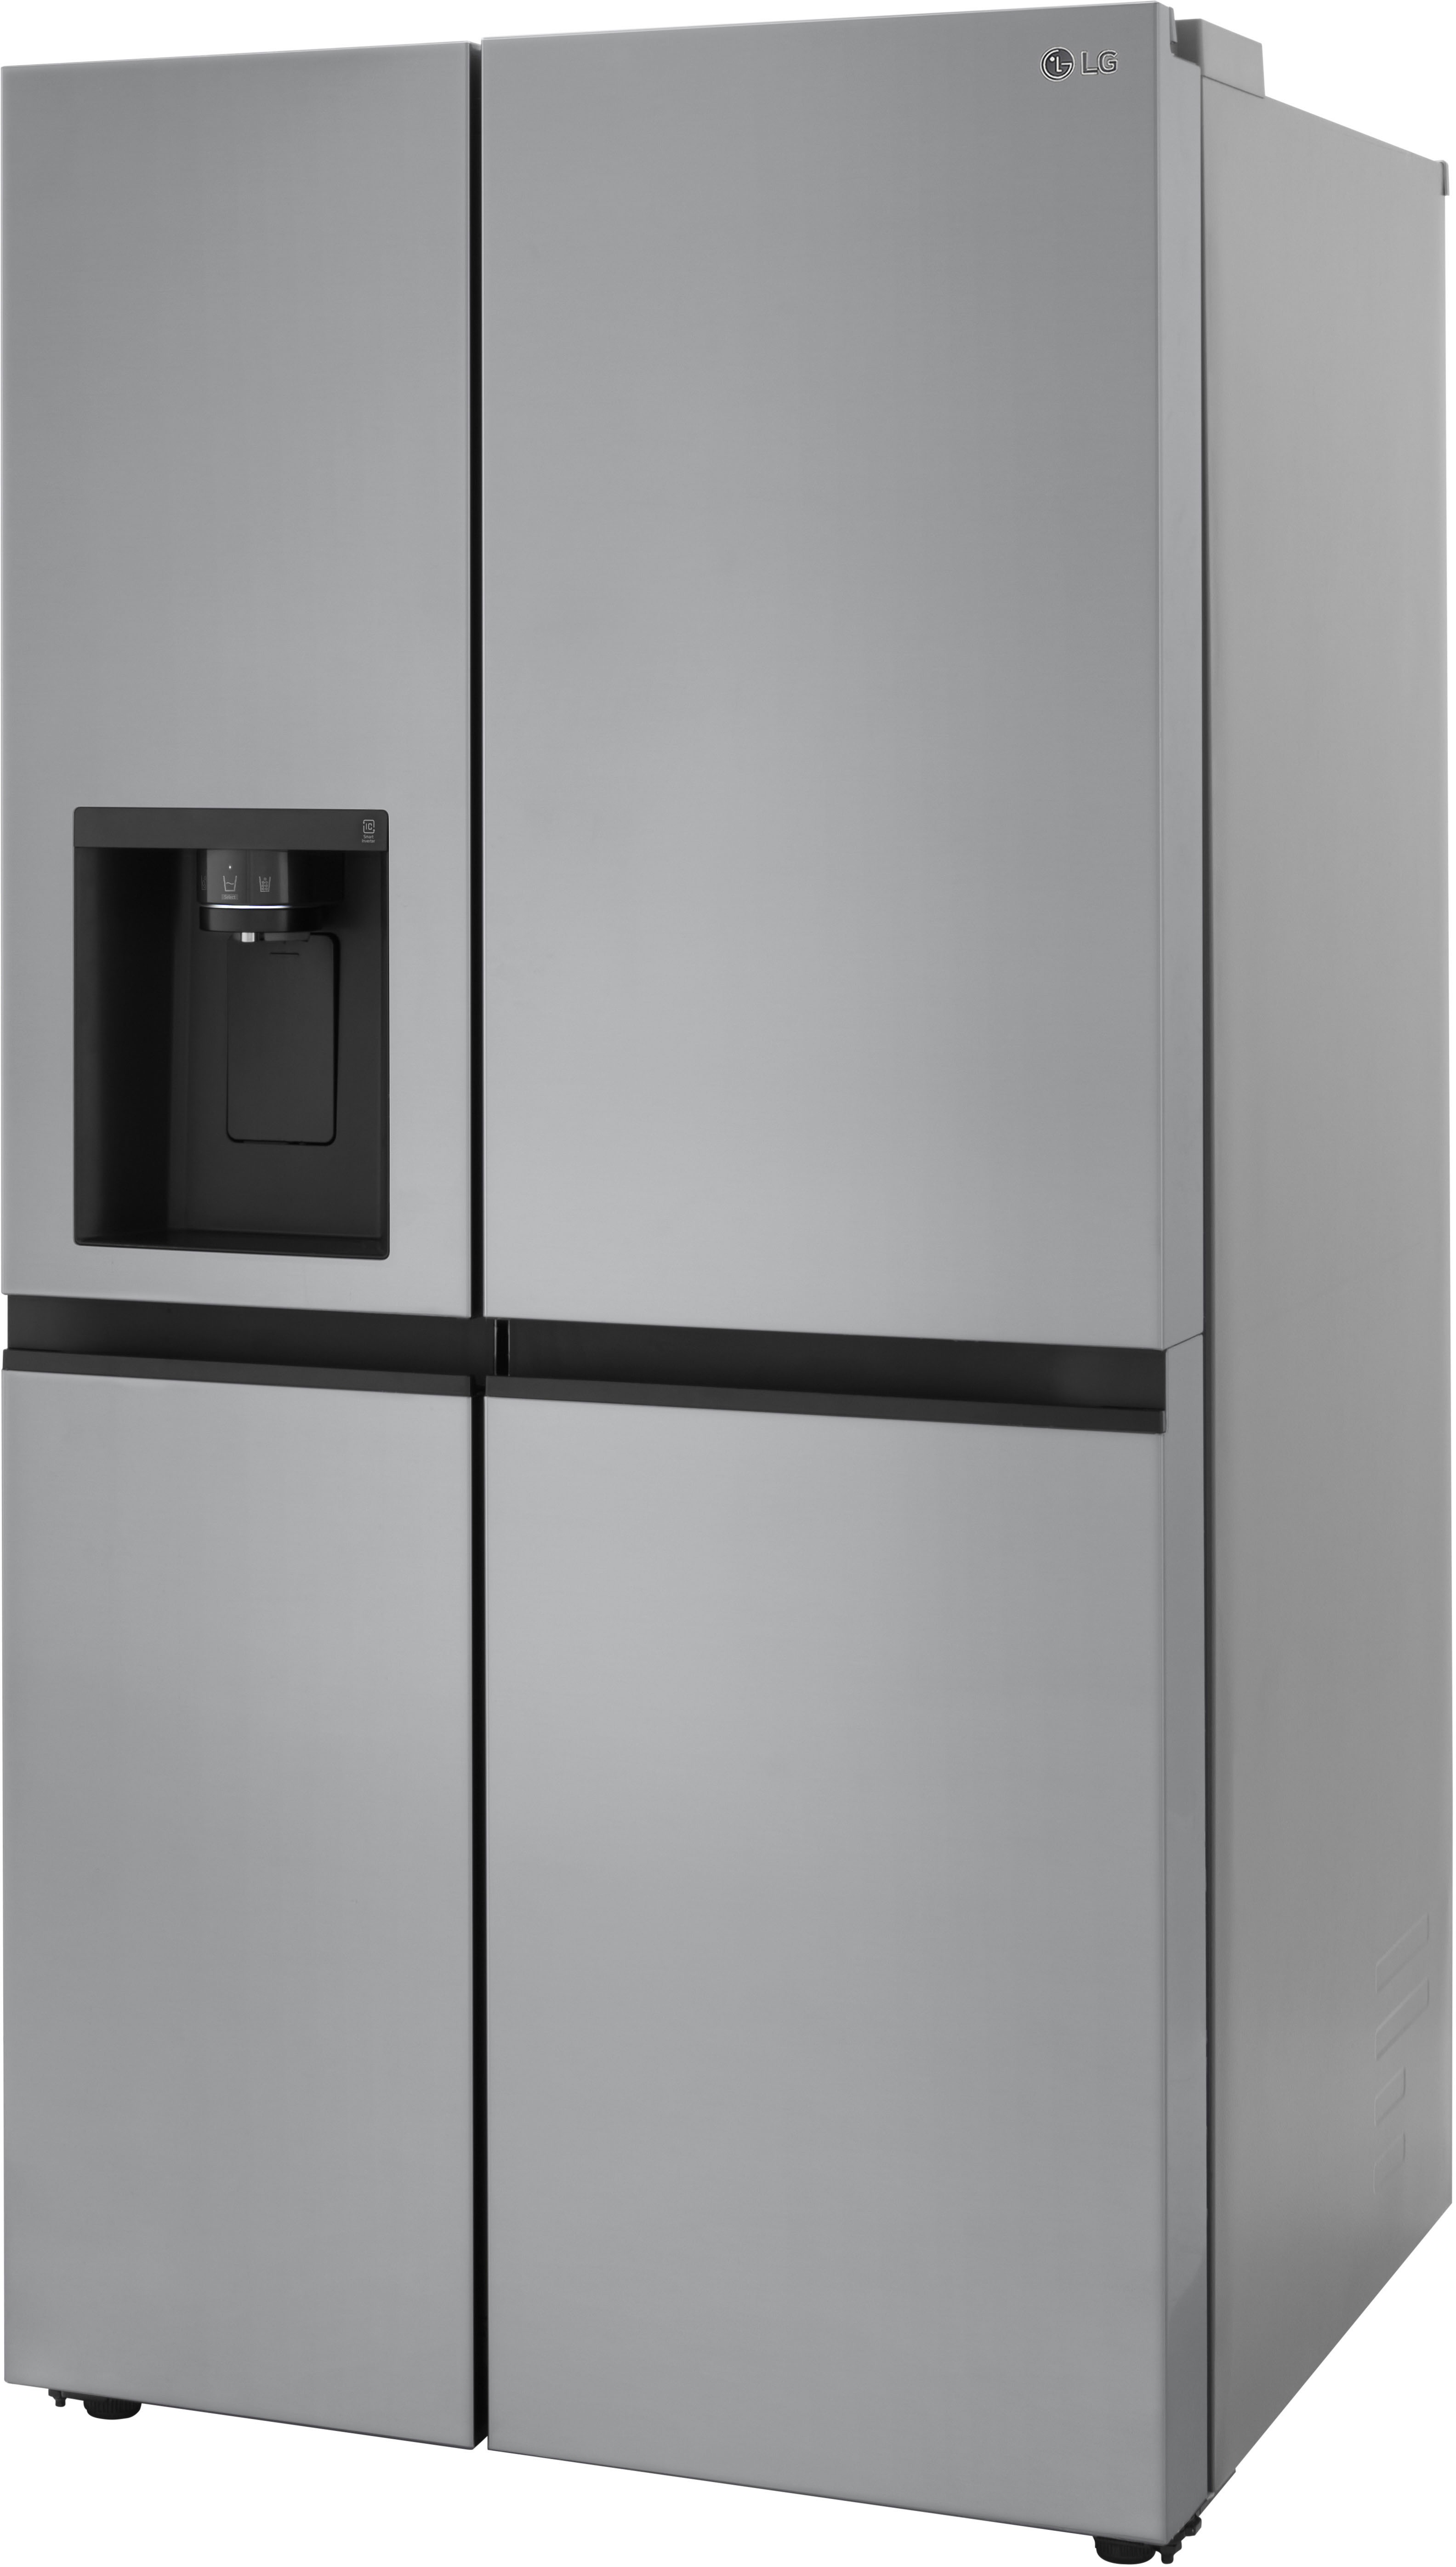 Angle View: Viking - Professional 5 Series Quiet Cool 29.1 Cu. Ft. Side-by-Side Built-In Refrigerator - White